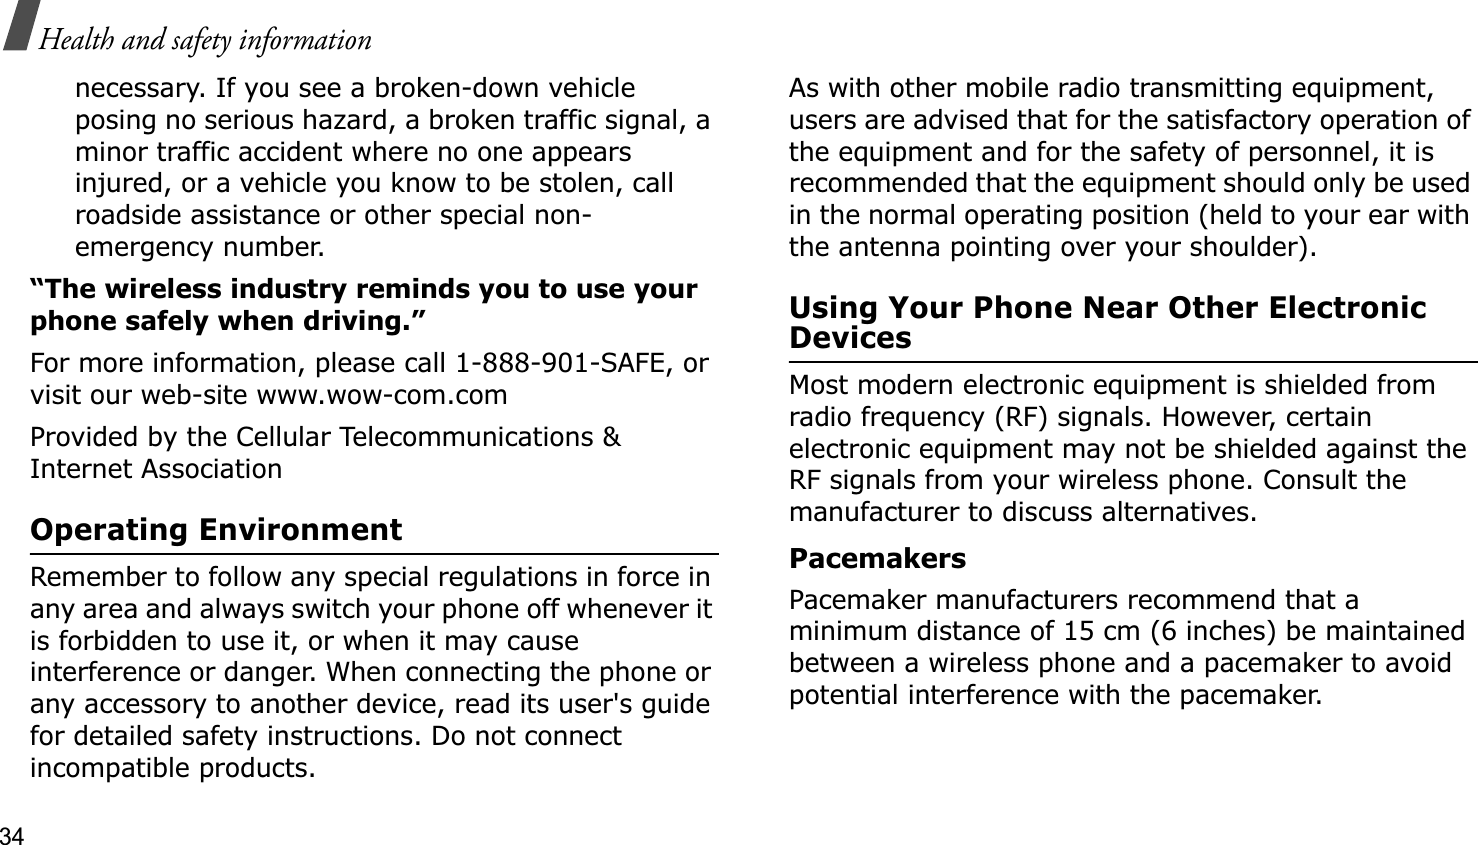 34Health and safety informationnecessary. If you see a broken-down vehicle posing no serious hazard, a broken traffic signal, a minor traffic accident where no one appears injured, or a vehicle you know to be stolen, call roadside assistance or other special non-emergency number.“The wireless industry reminds you to use your phone safely when driving.”For more information, please call 1-888-901-SAFE, or visit our web-site www.wow-com.comProvided by the Cellular Telecommunications &amp; Internet AssociationOperating EnvironmentRemember to follow any special regulations in force in any area and always switch your phone off whenever it is forbidden to use it, or when it may cause interference or danger. When connecting the phone or any accessory to another device, read its user&apos;s guide for detailed safety instructions. Do not connect incompatible products.As with other mobile radio transmitting equipment, users are advised that for the satisfactory operation of the equipment and for the safety of personnel, it is recommended that the equipment should only be used in the normal operating position (held to your ear with the antenna pointing over your shoulder).Using Your Phone Near Other Electronic DevicesMost modern electronic equipment is shielded from radio frequency (RF) signals. However, certain electronic equipment may not be shielded against the RF signals from your wireless phone. Consult the manufacturer to discuss alternatives.PacemakersPacemaker manufacturers recommend that a minimum distance of 15 cm (6 inches) be maintained between a wireless phone and a pacemaker to avoid potential interference with the pacemaker.